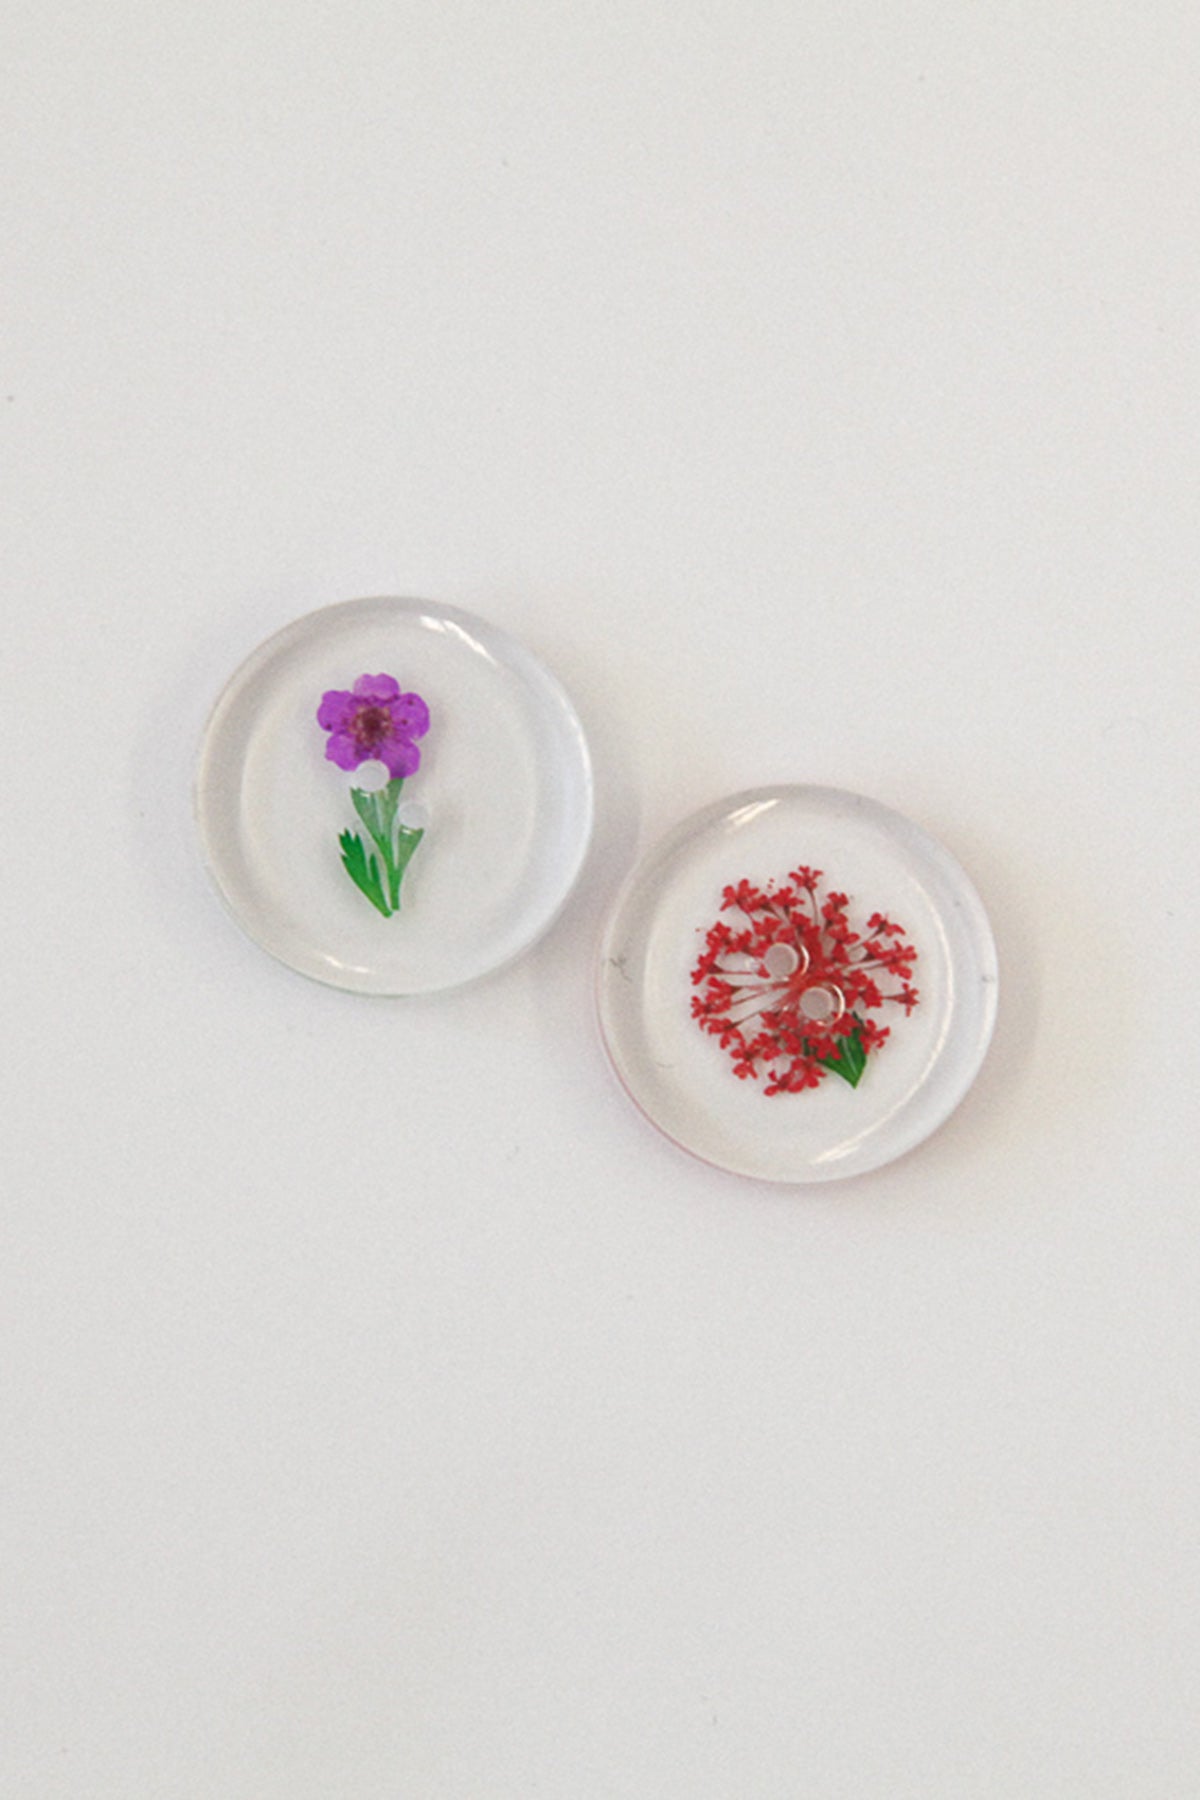 Flower Pressed Lucite Buttons - Round